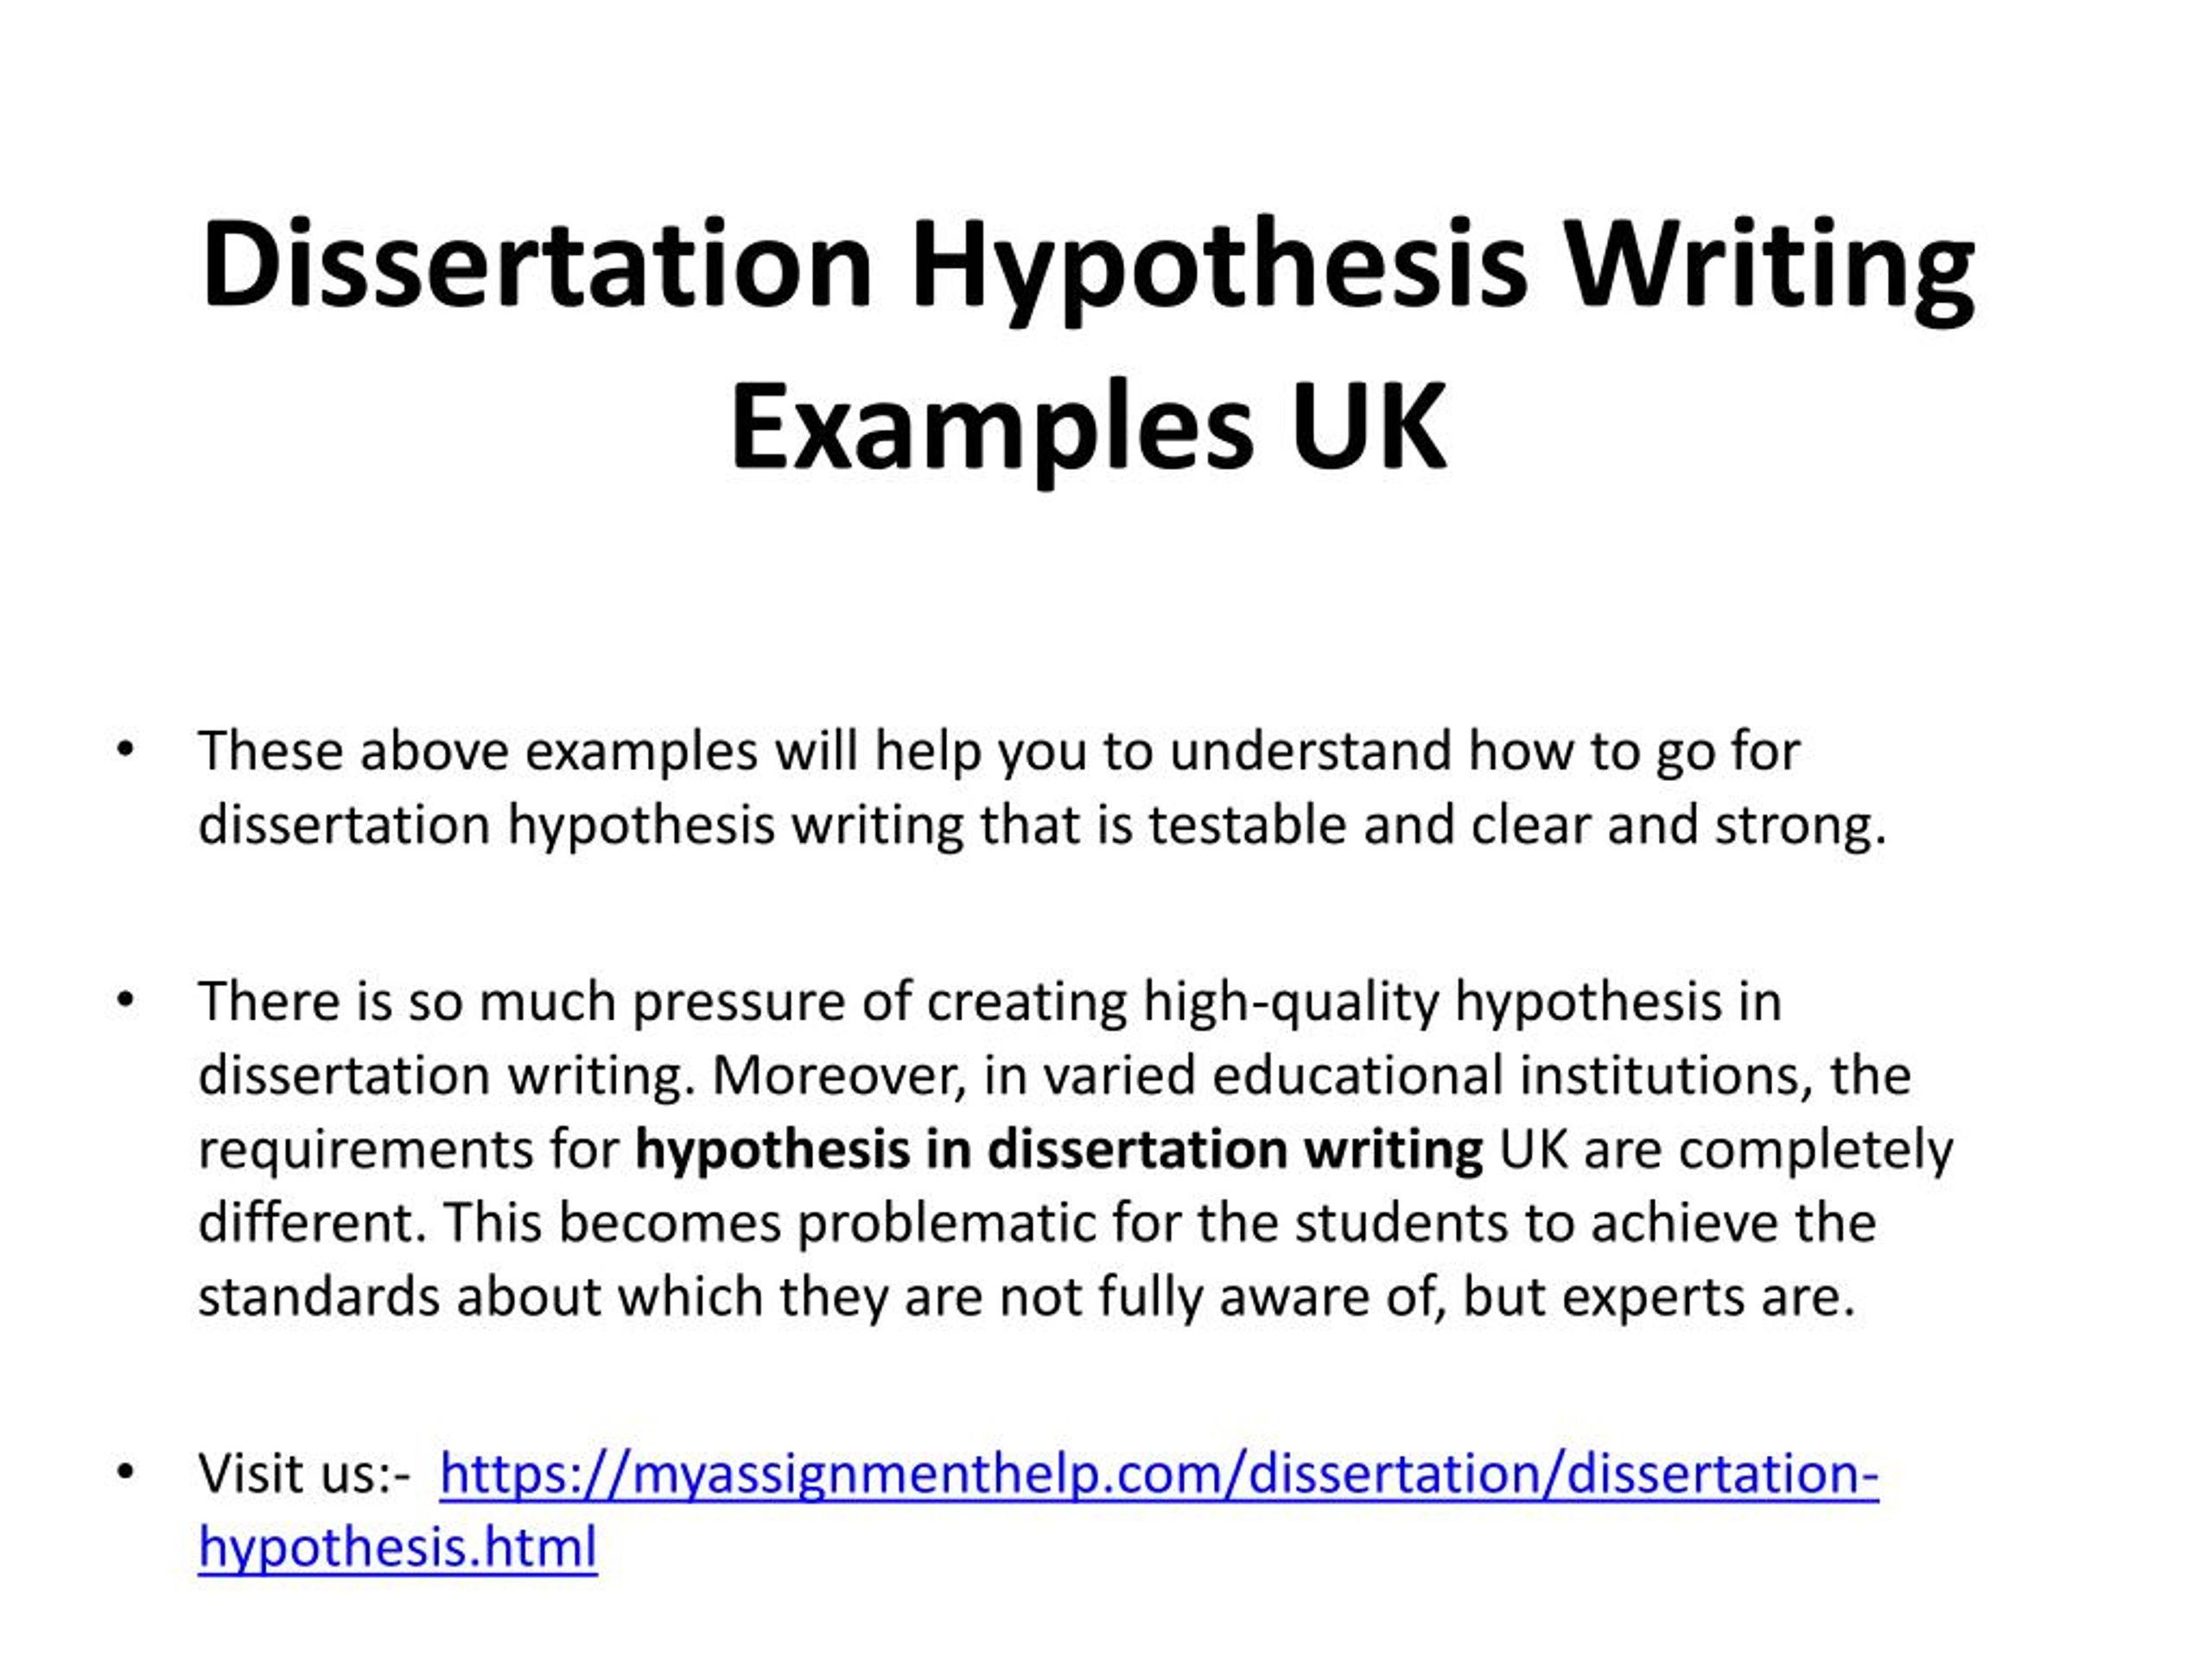 Help with writing a dissertation hypothesis